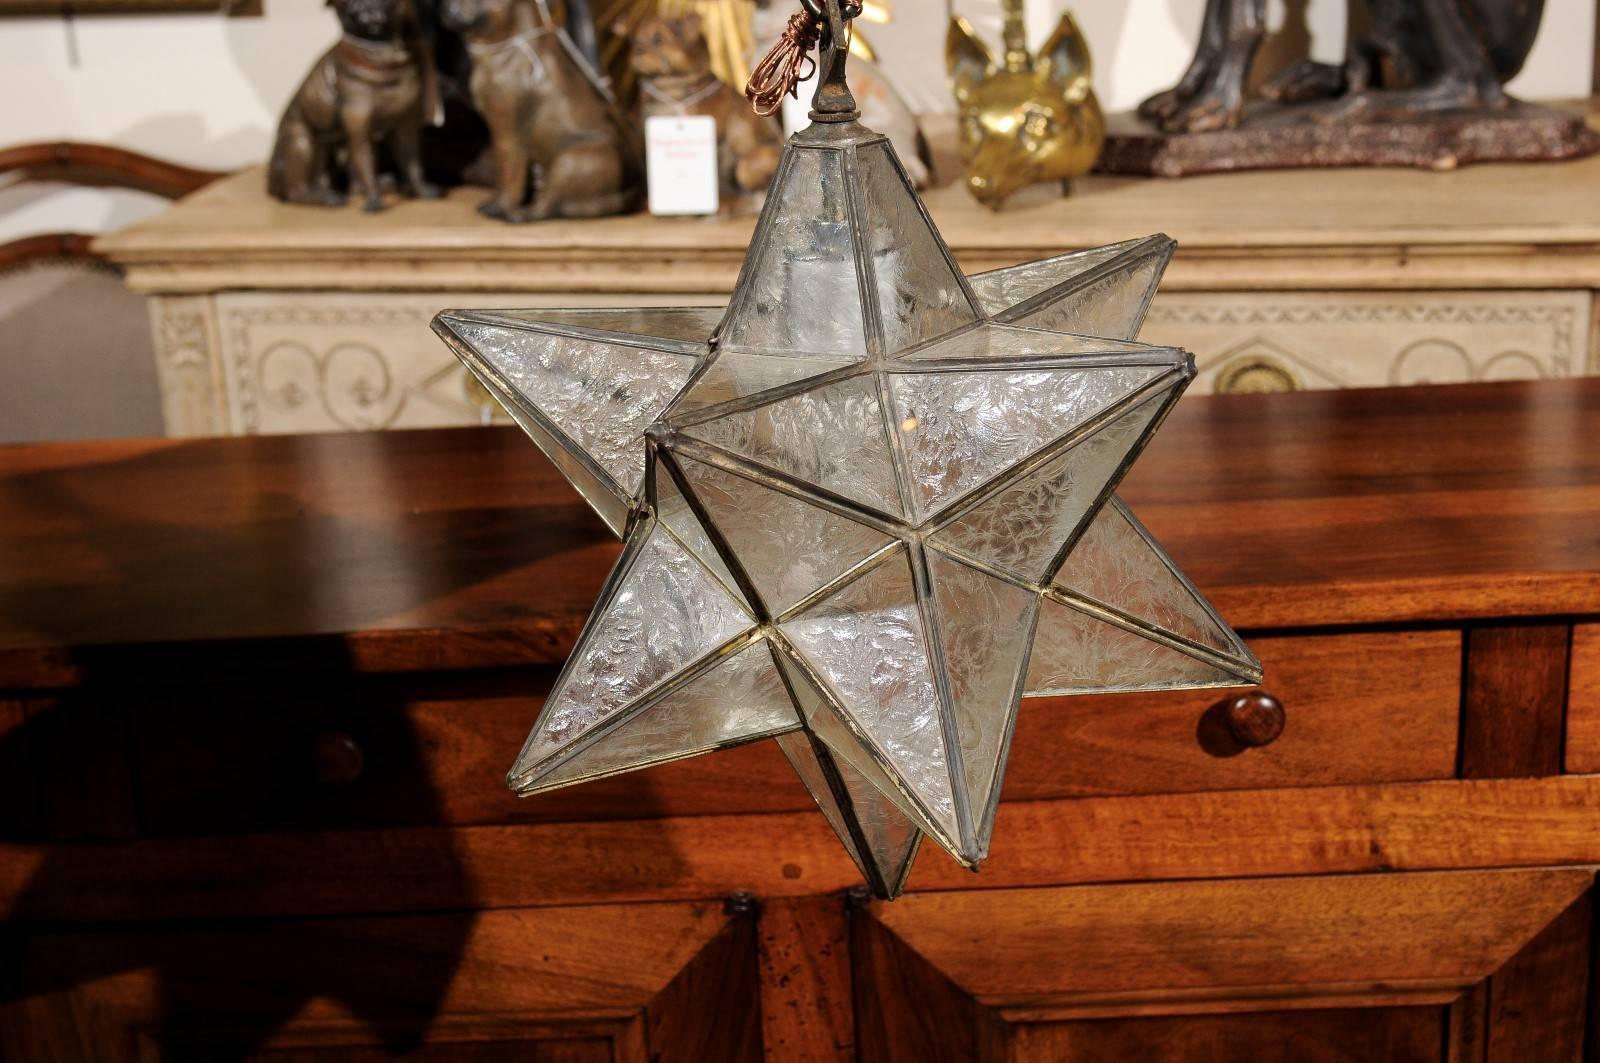 A French vintage star light fixture from the Mid-Century. This small size French chandelier from the mid-20th century features an energizing star shape. The metal frame surrounds the various etched glass panels, protecting the single light secured